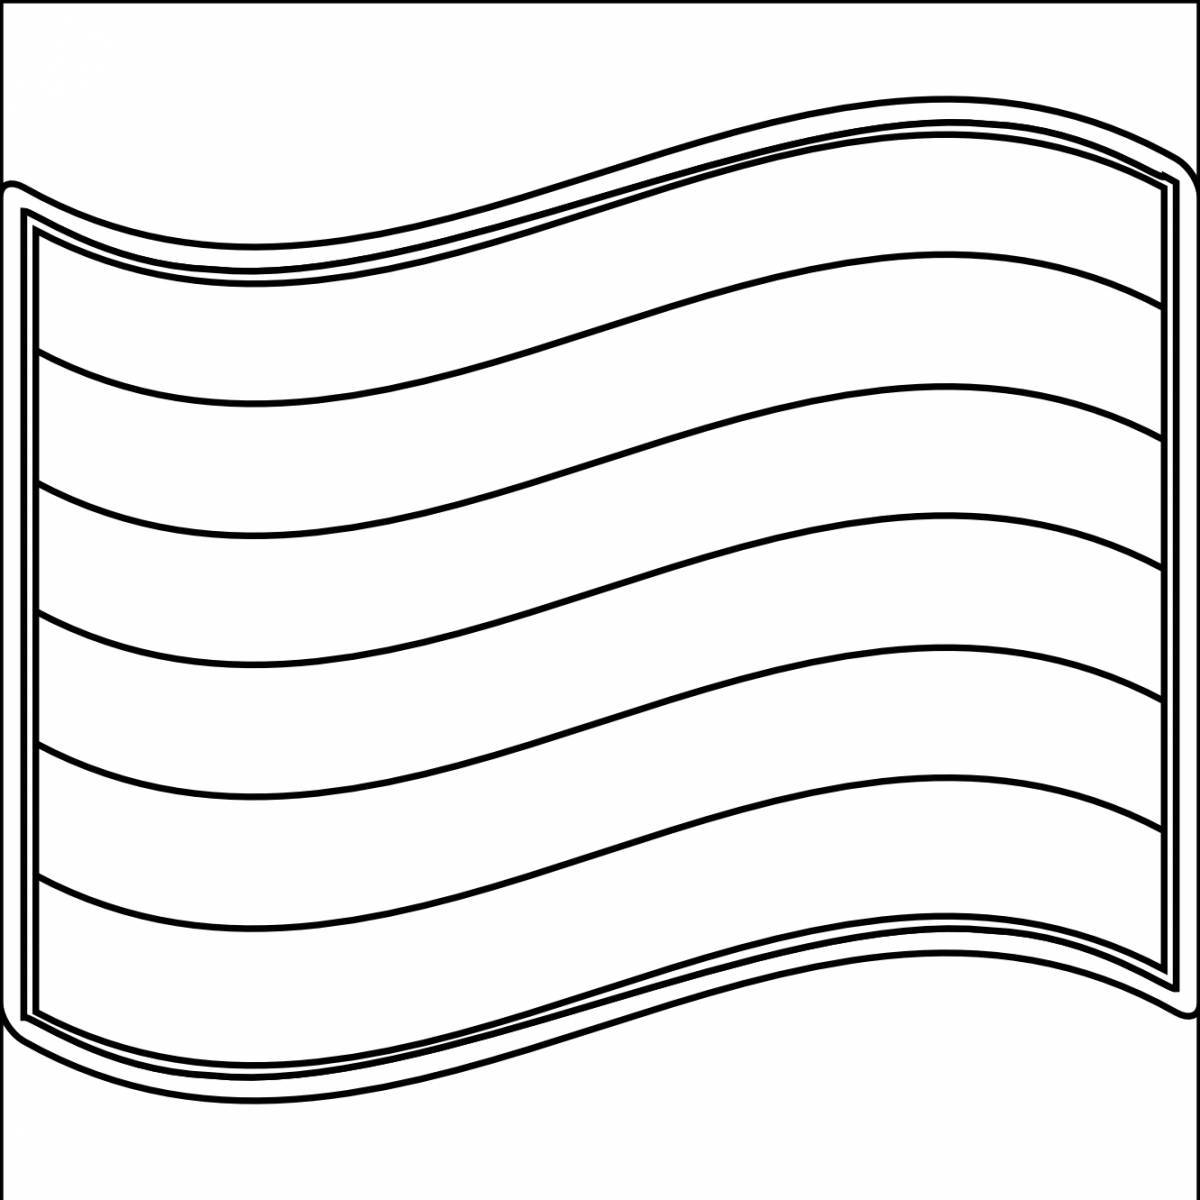 Coloring page shining Russian flag